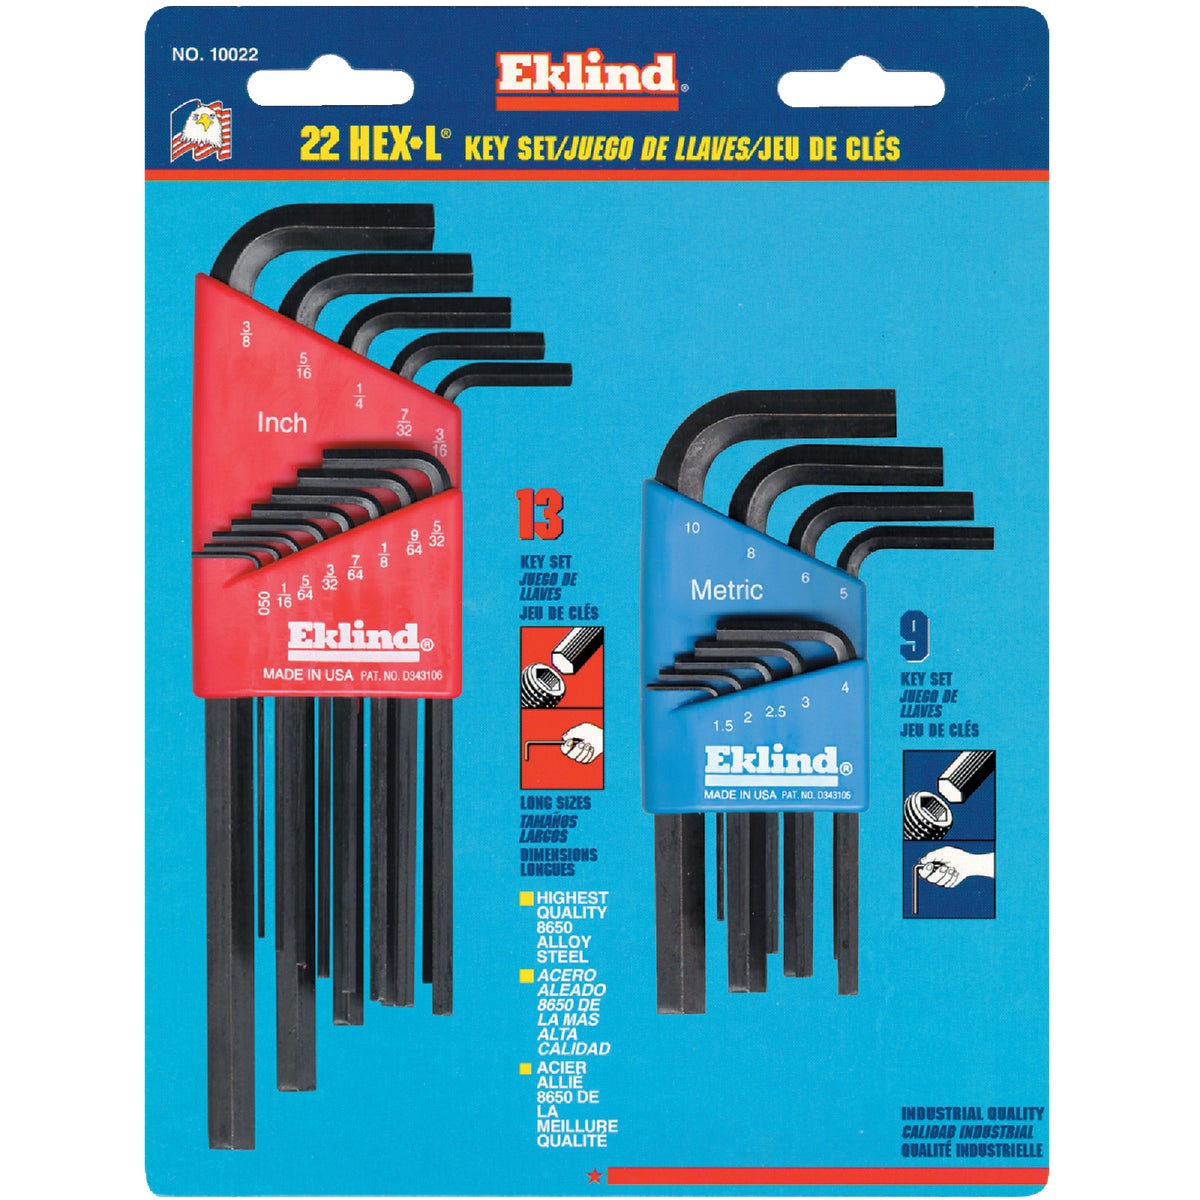 Item 355887, First set includes long arm hex keys in sizes: .